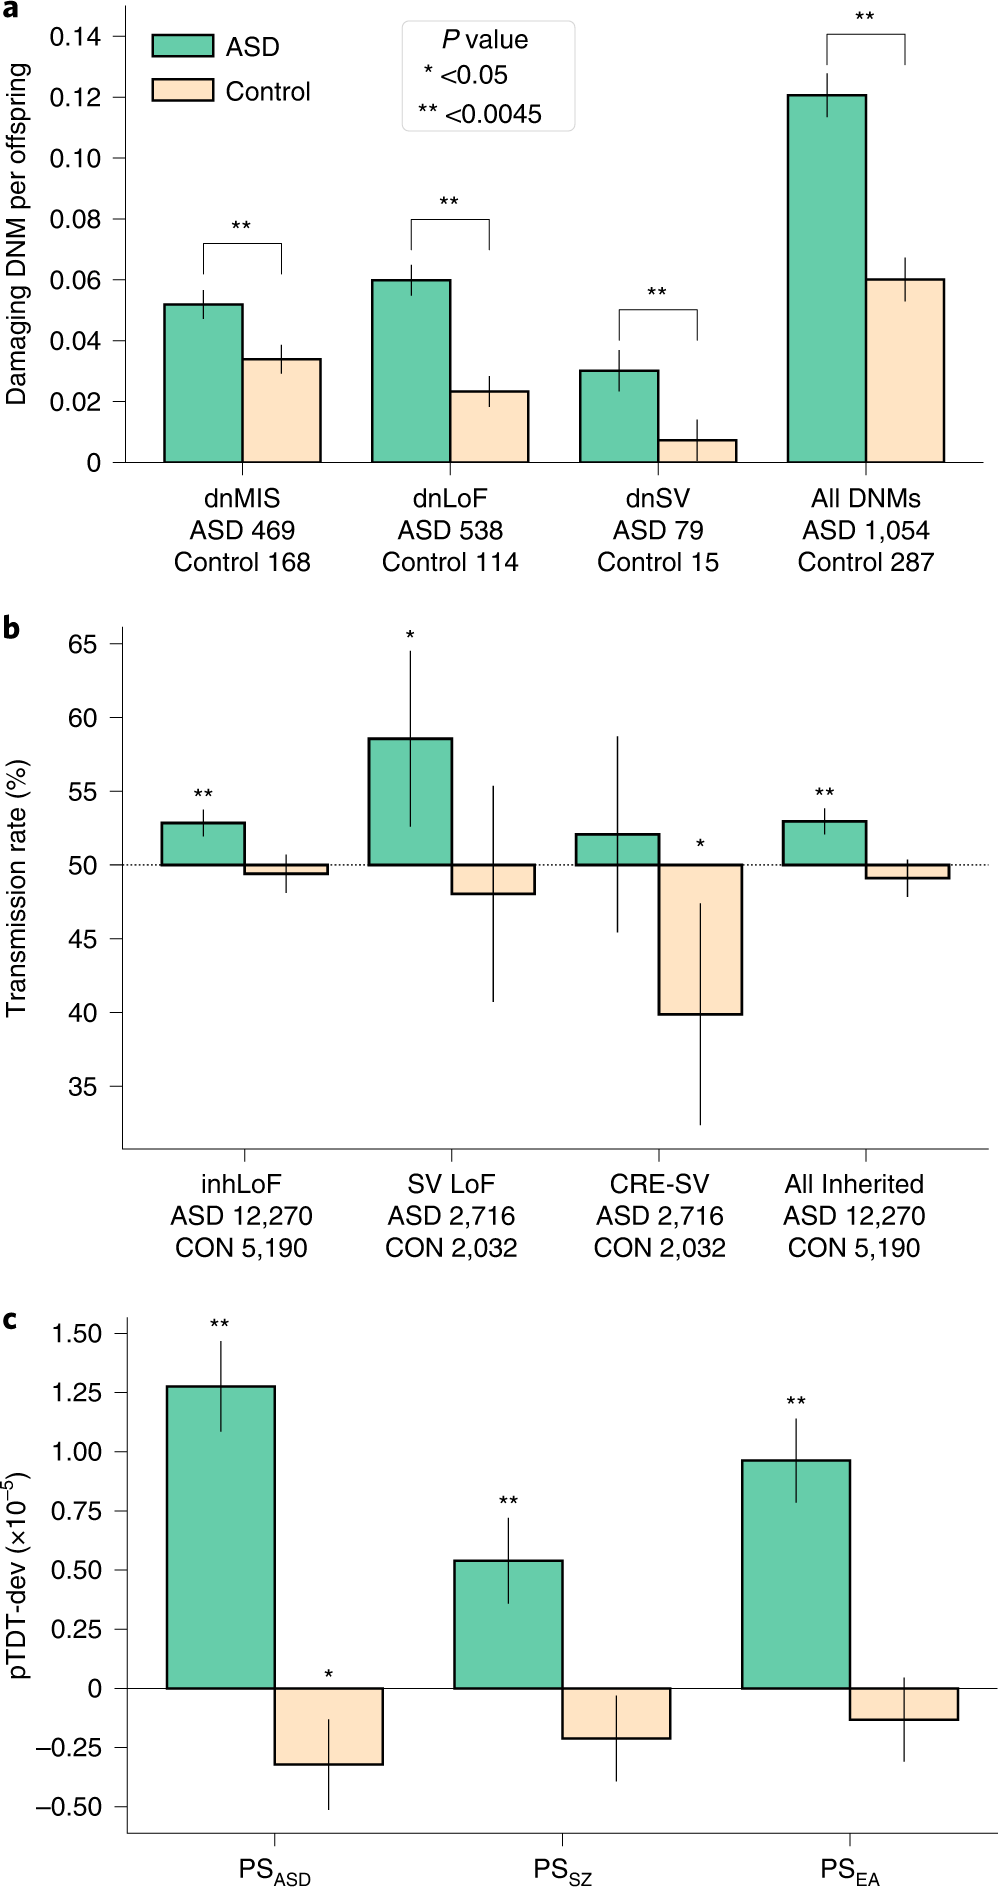 A phenotypic spectrum of autism attributable to the combined effects of rare variants, polygenic risk and sex | Nature Genetics